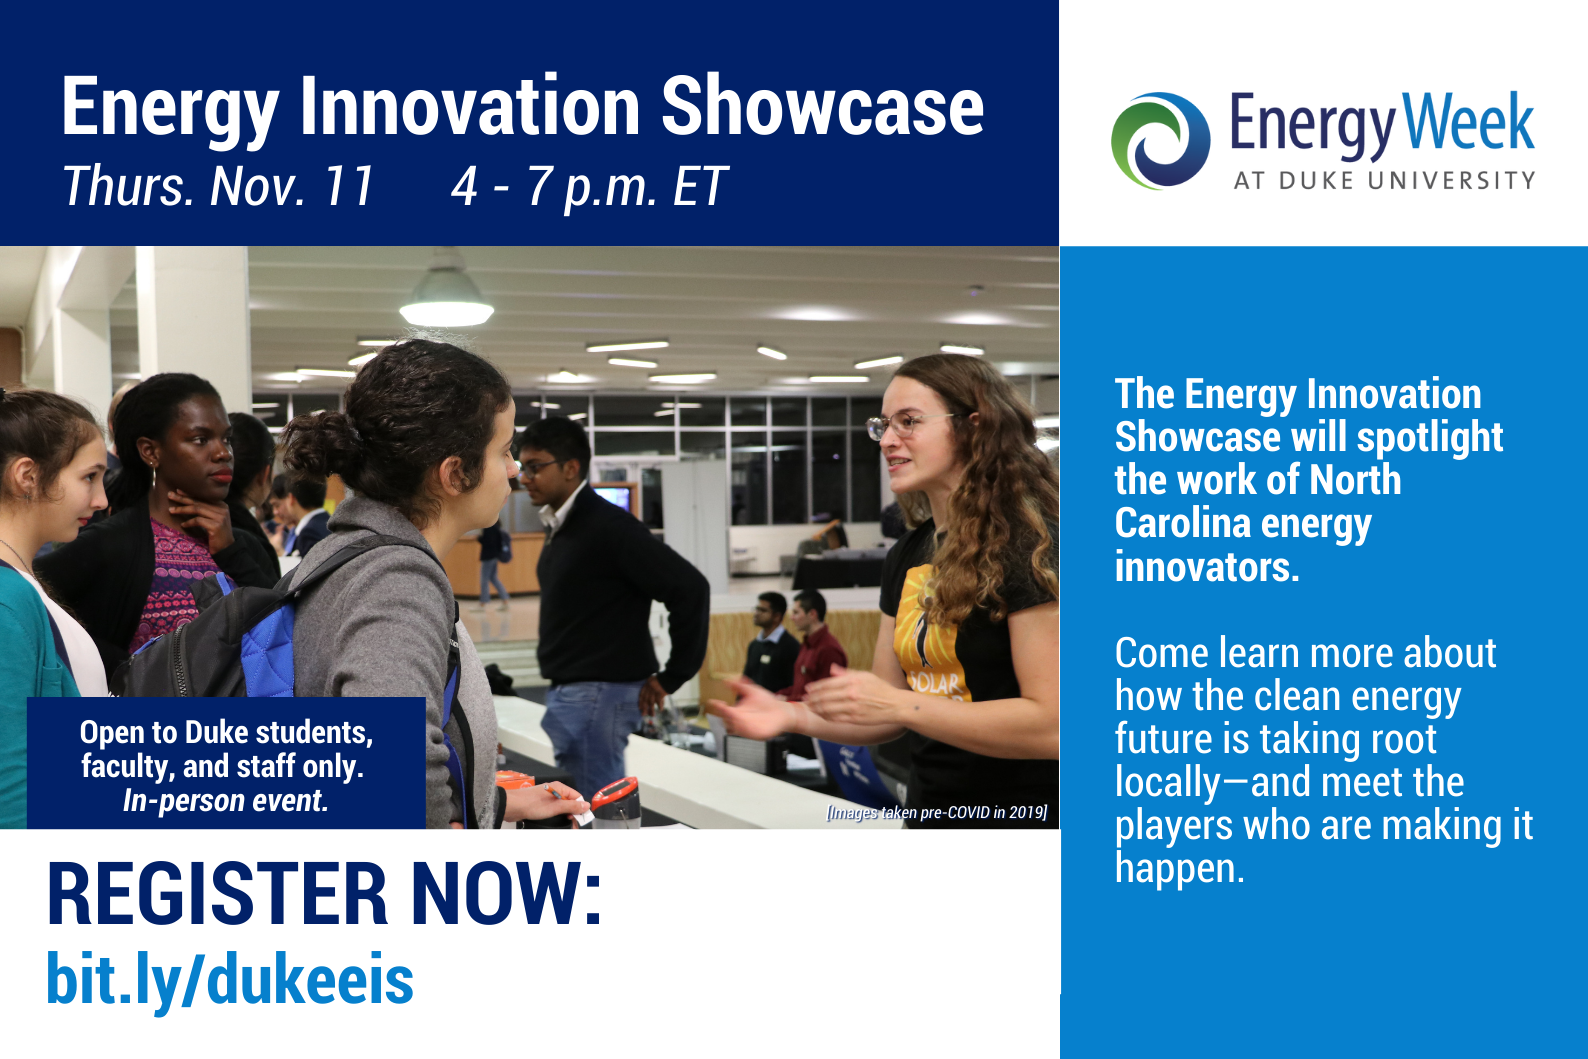 Logo: Energy Week at Duke, Image: Students talking Text: Energy Innovation Showcase Thurs. Nov. 11 4-7pm ET, Open to Duke students, faculty, and staff only. In-person event. Register now: bit.ly/dukeeis, The Energy Innovation Showcase will spotlight the work of North Carolina energy innovators. Come learn more about how the clean energy future is taking root locally - and meet the players who are making it happen.